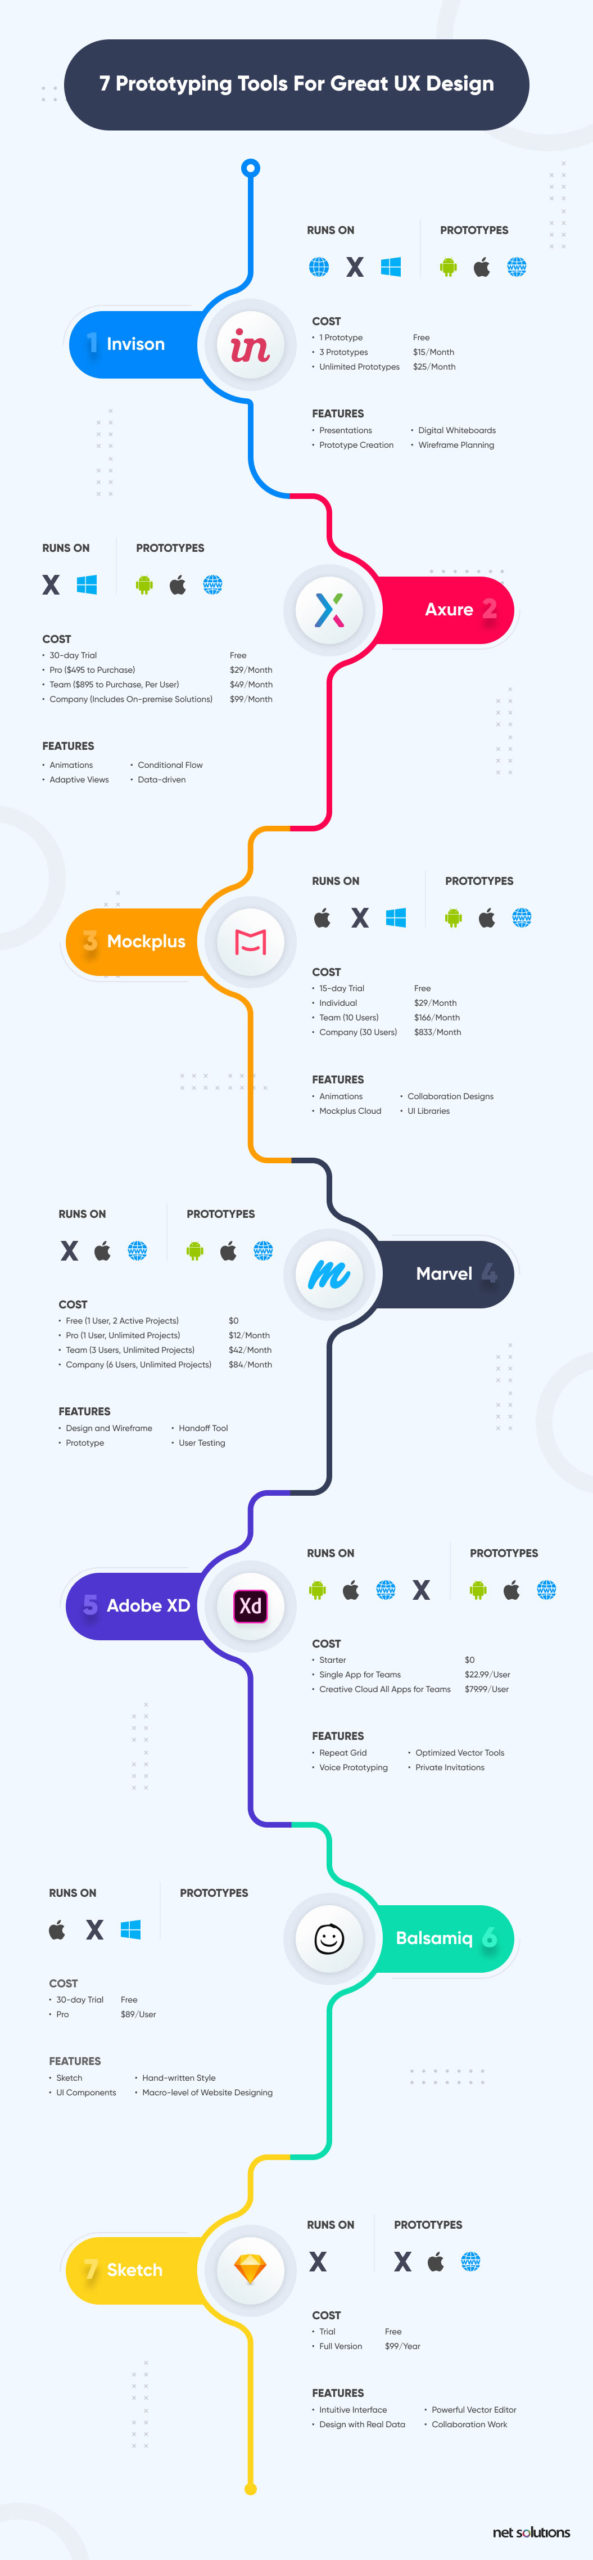 Top Prototyping Tools Comparison Infographic